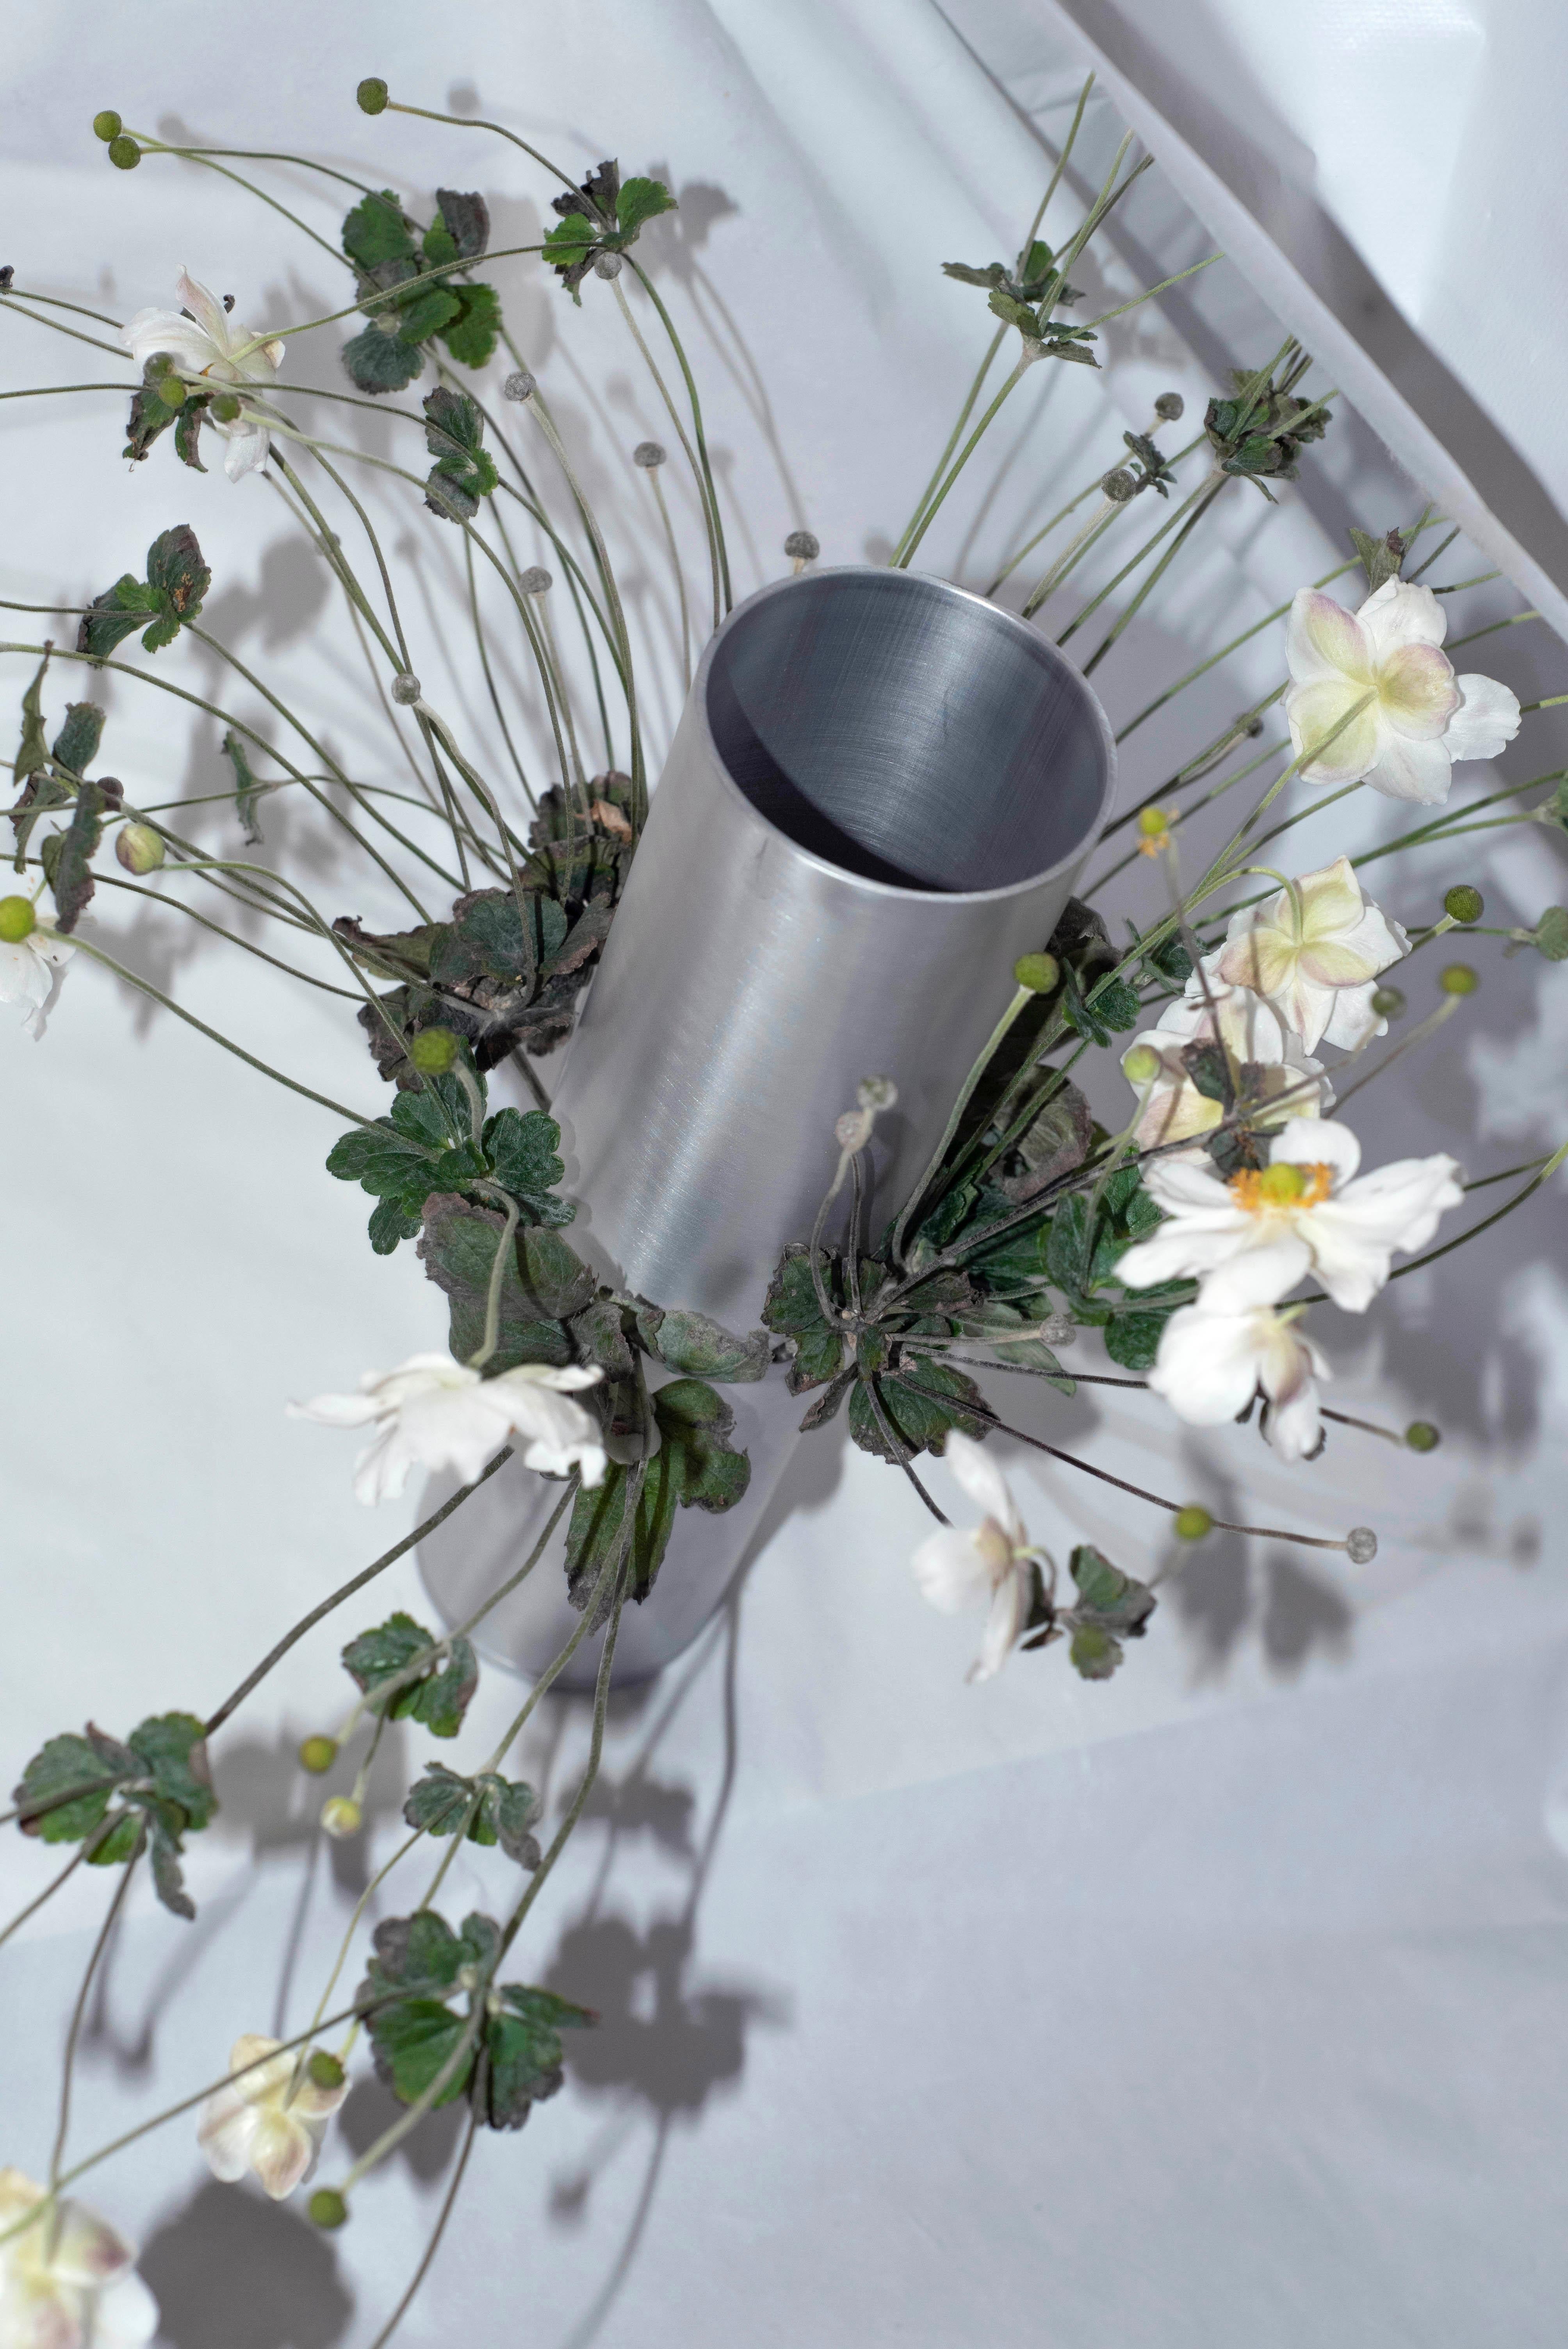 Tubito 003 is a high polished aluminium vase with side perforations that work as alternative overtures for the flowers it is build to contain. Inspired by the Japanese art of Ikebana and Spanish Almorratxes, pinasaan is a series of metal vases